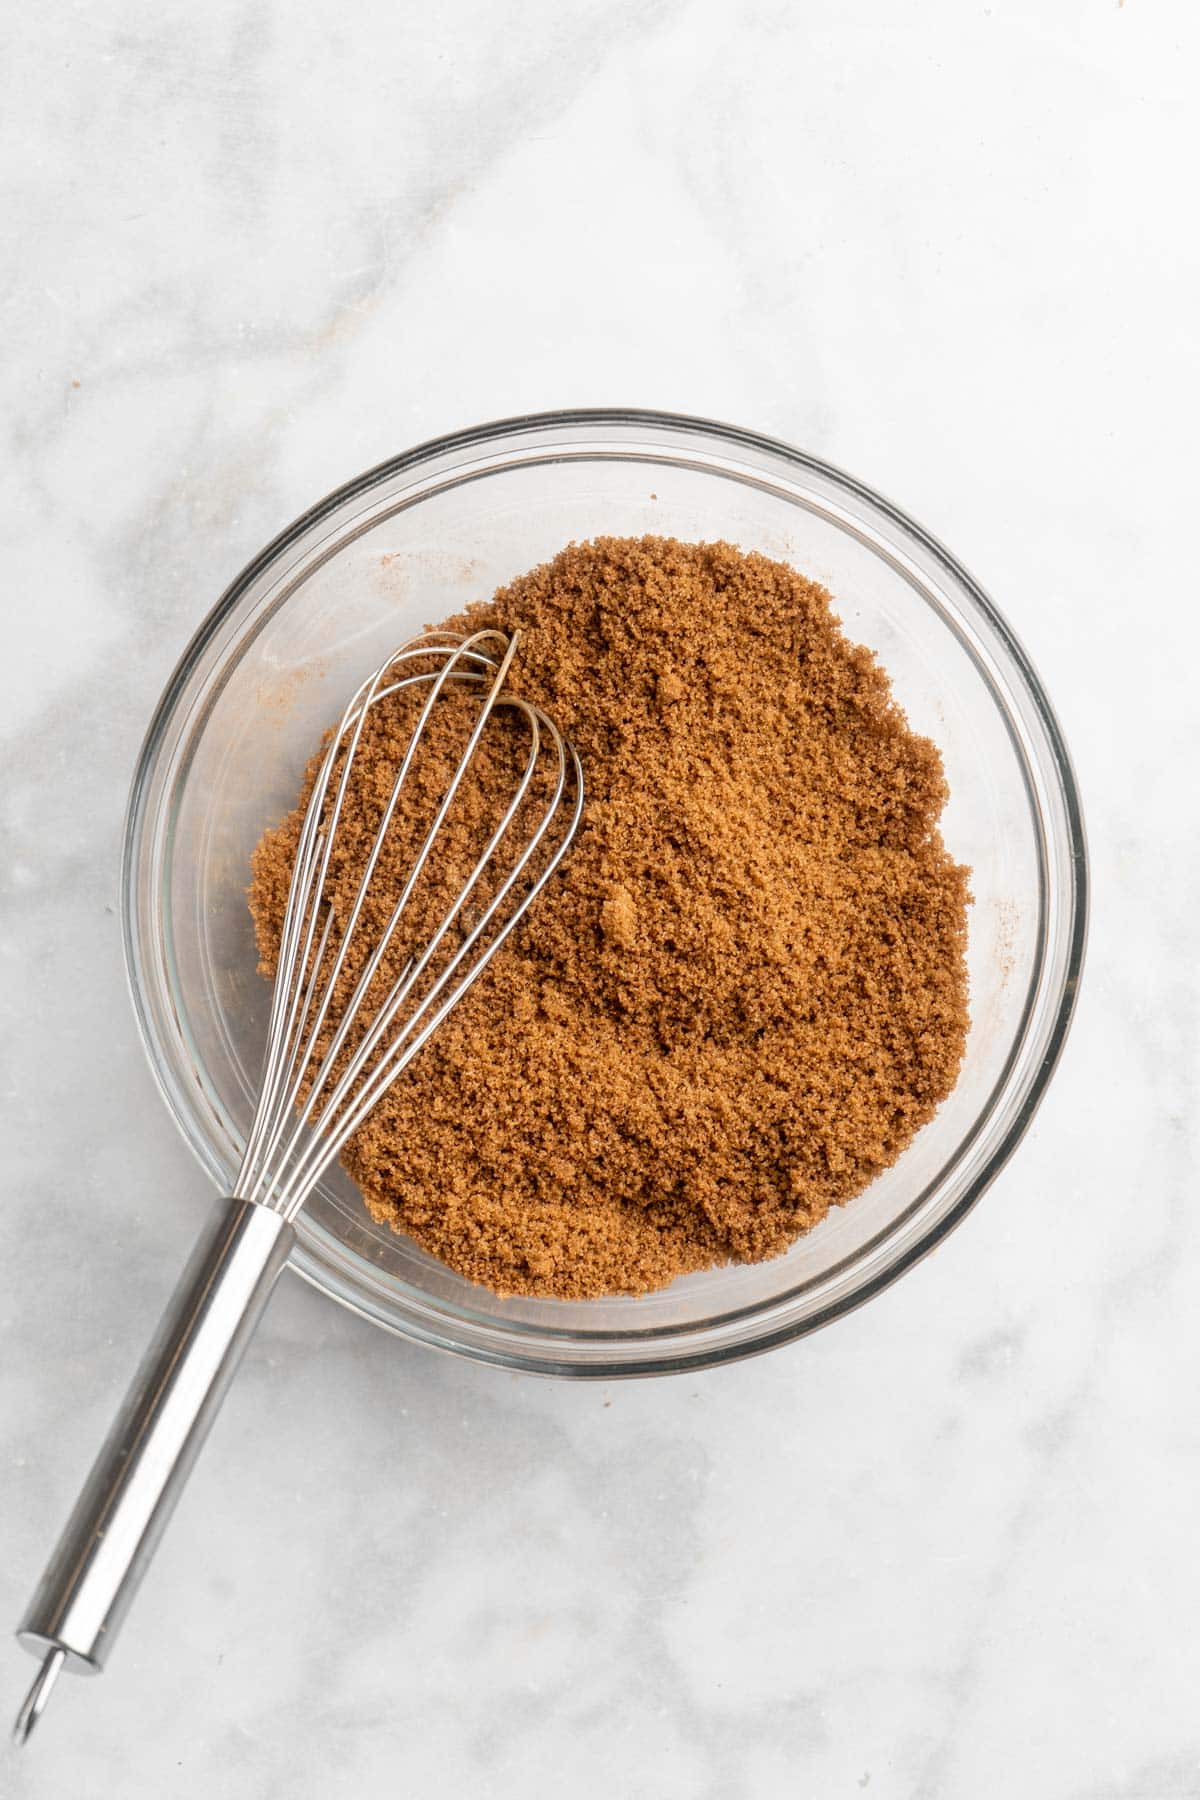 Cinnamon and sugar mixture in a small bowl with a whisk.